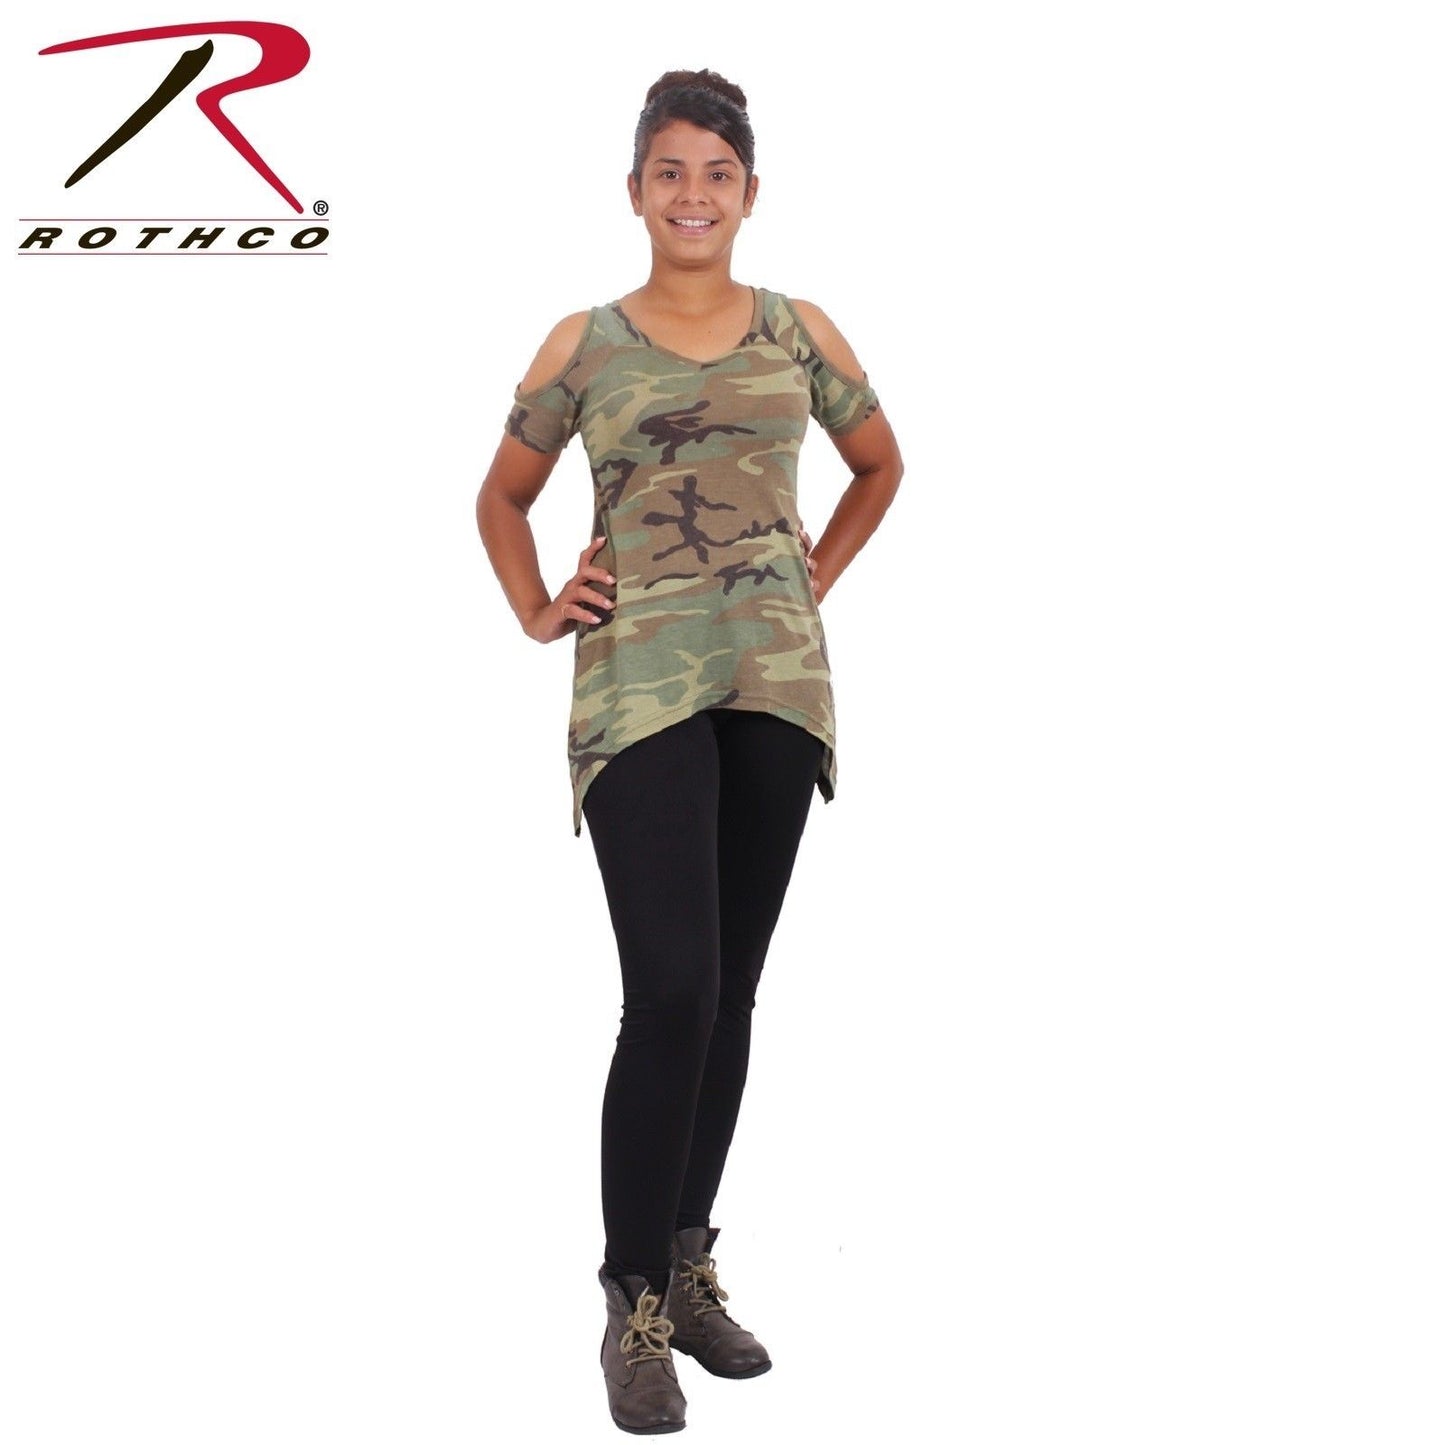 Rothco Womens Camo Cold Shoulder Top - Ladies Vintage Green Camo Flare Cut Shirt